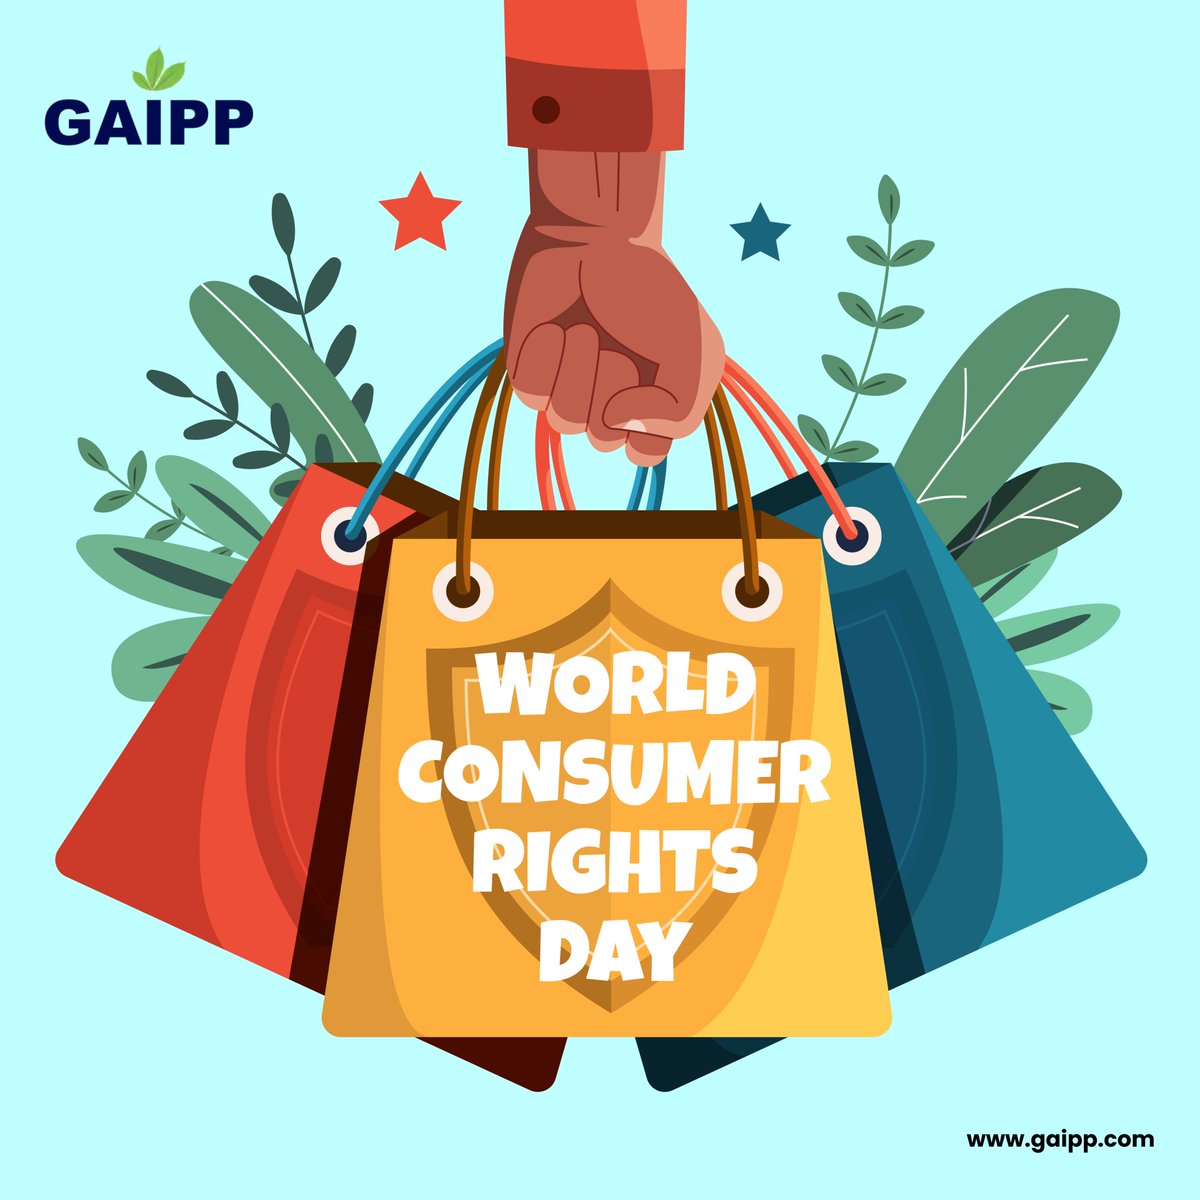 Happy World Consumer Rights Day! 

Today is a day to raise awareness about consumer rights and the need for better protection, education, and advocacy.

#gaipp #WorldConsumerRightsDay #ConsumerRights #ConsumerProtection #ConsumerAdvocacy #ConsumerEducation